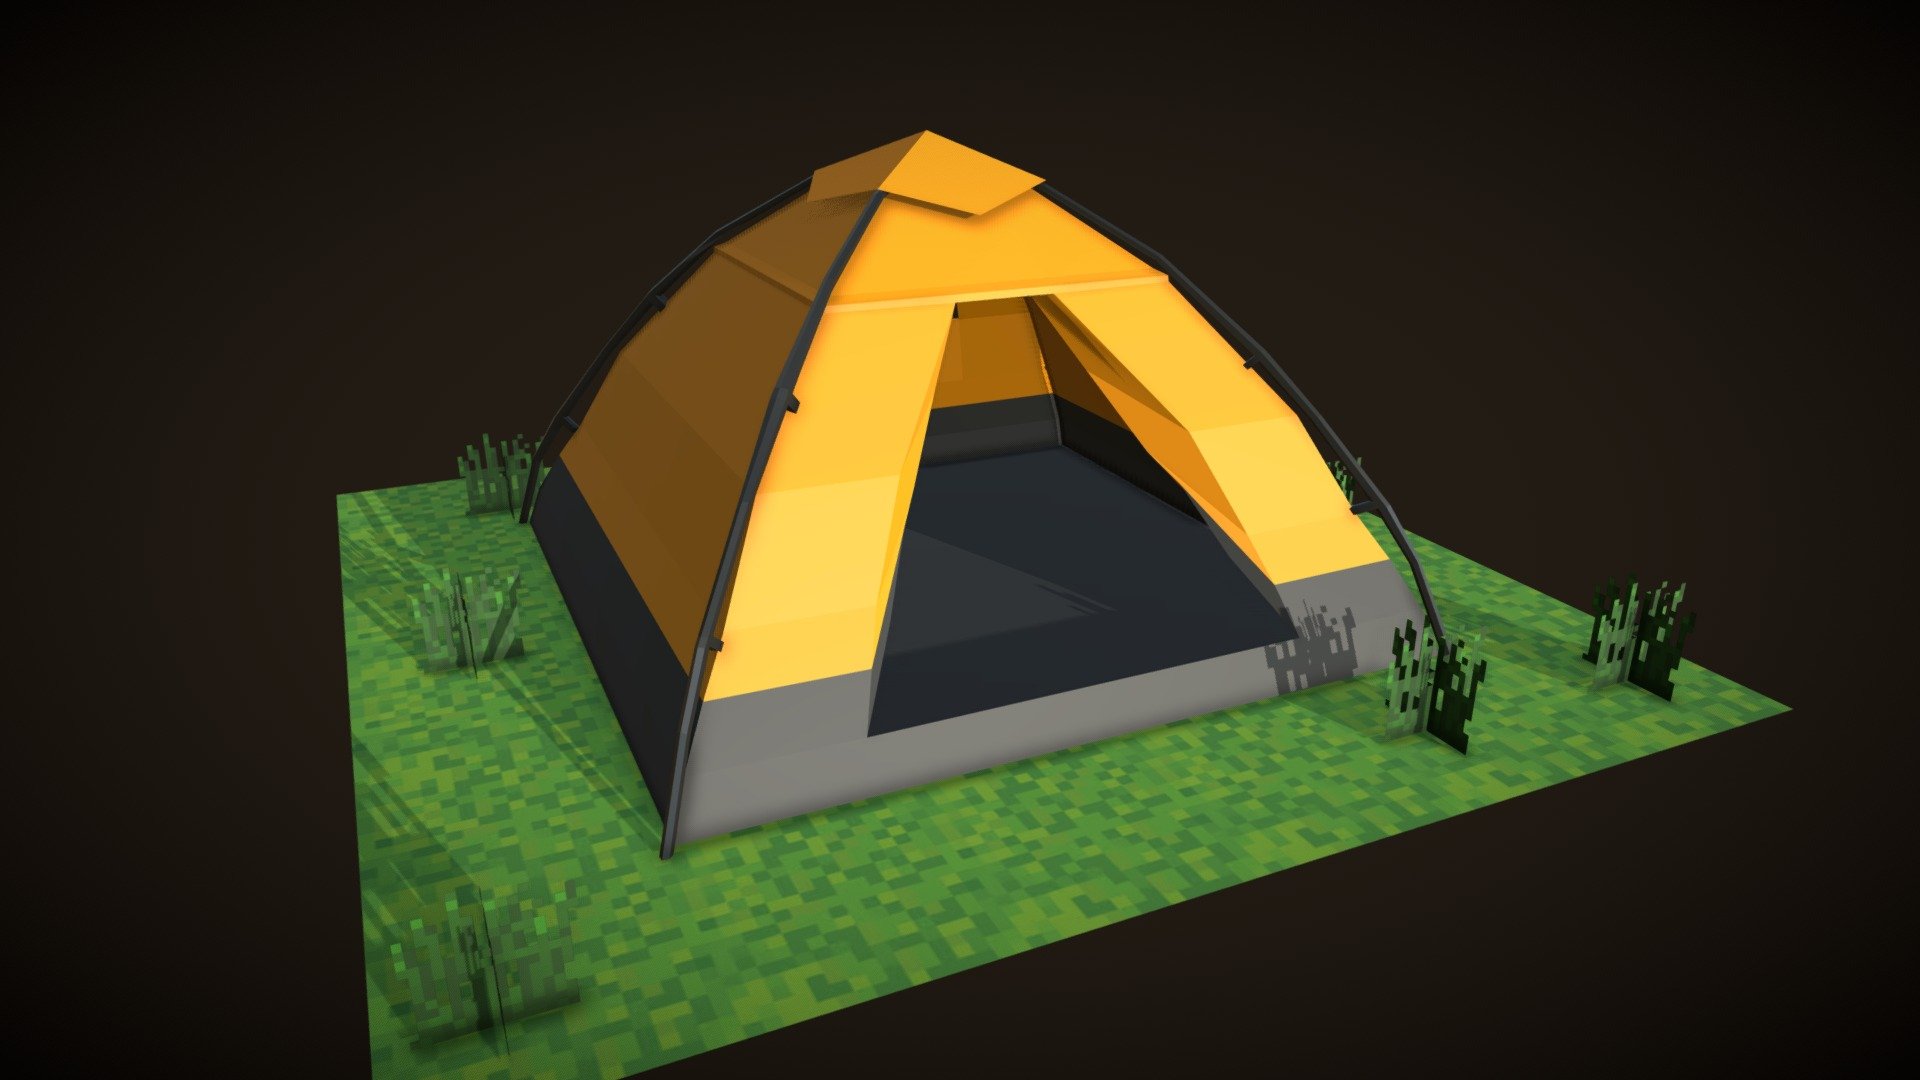 Second entry to the Sketchfab Low Poly Challenge: Adventure Props :)
Modeled in Maya 3d model